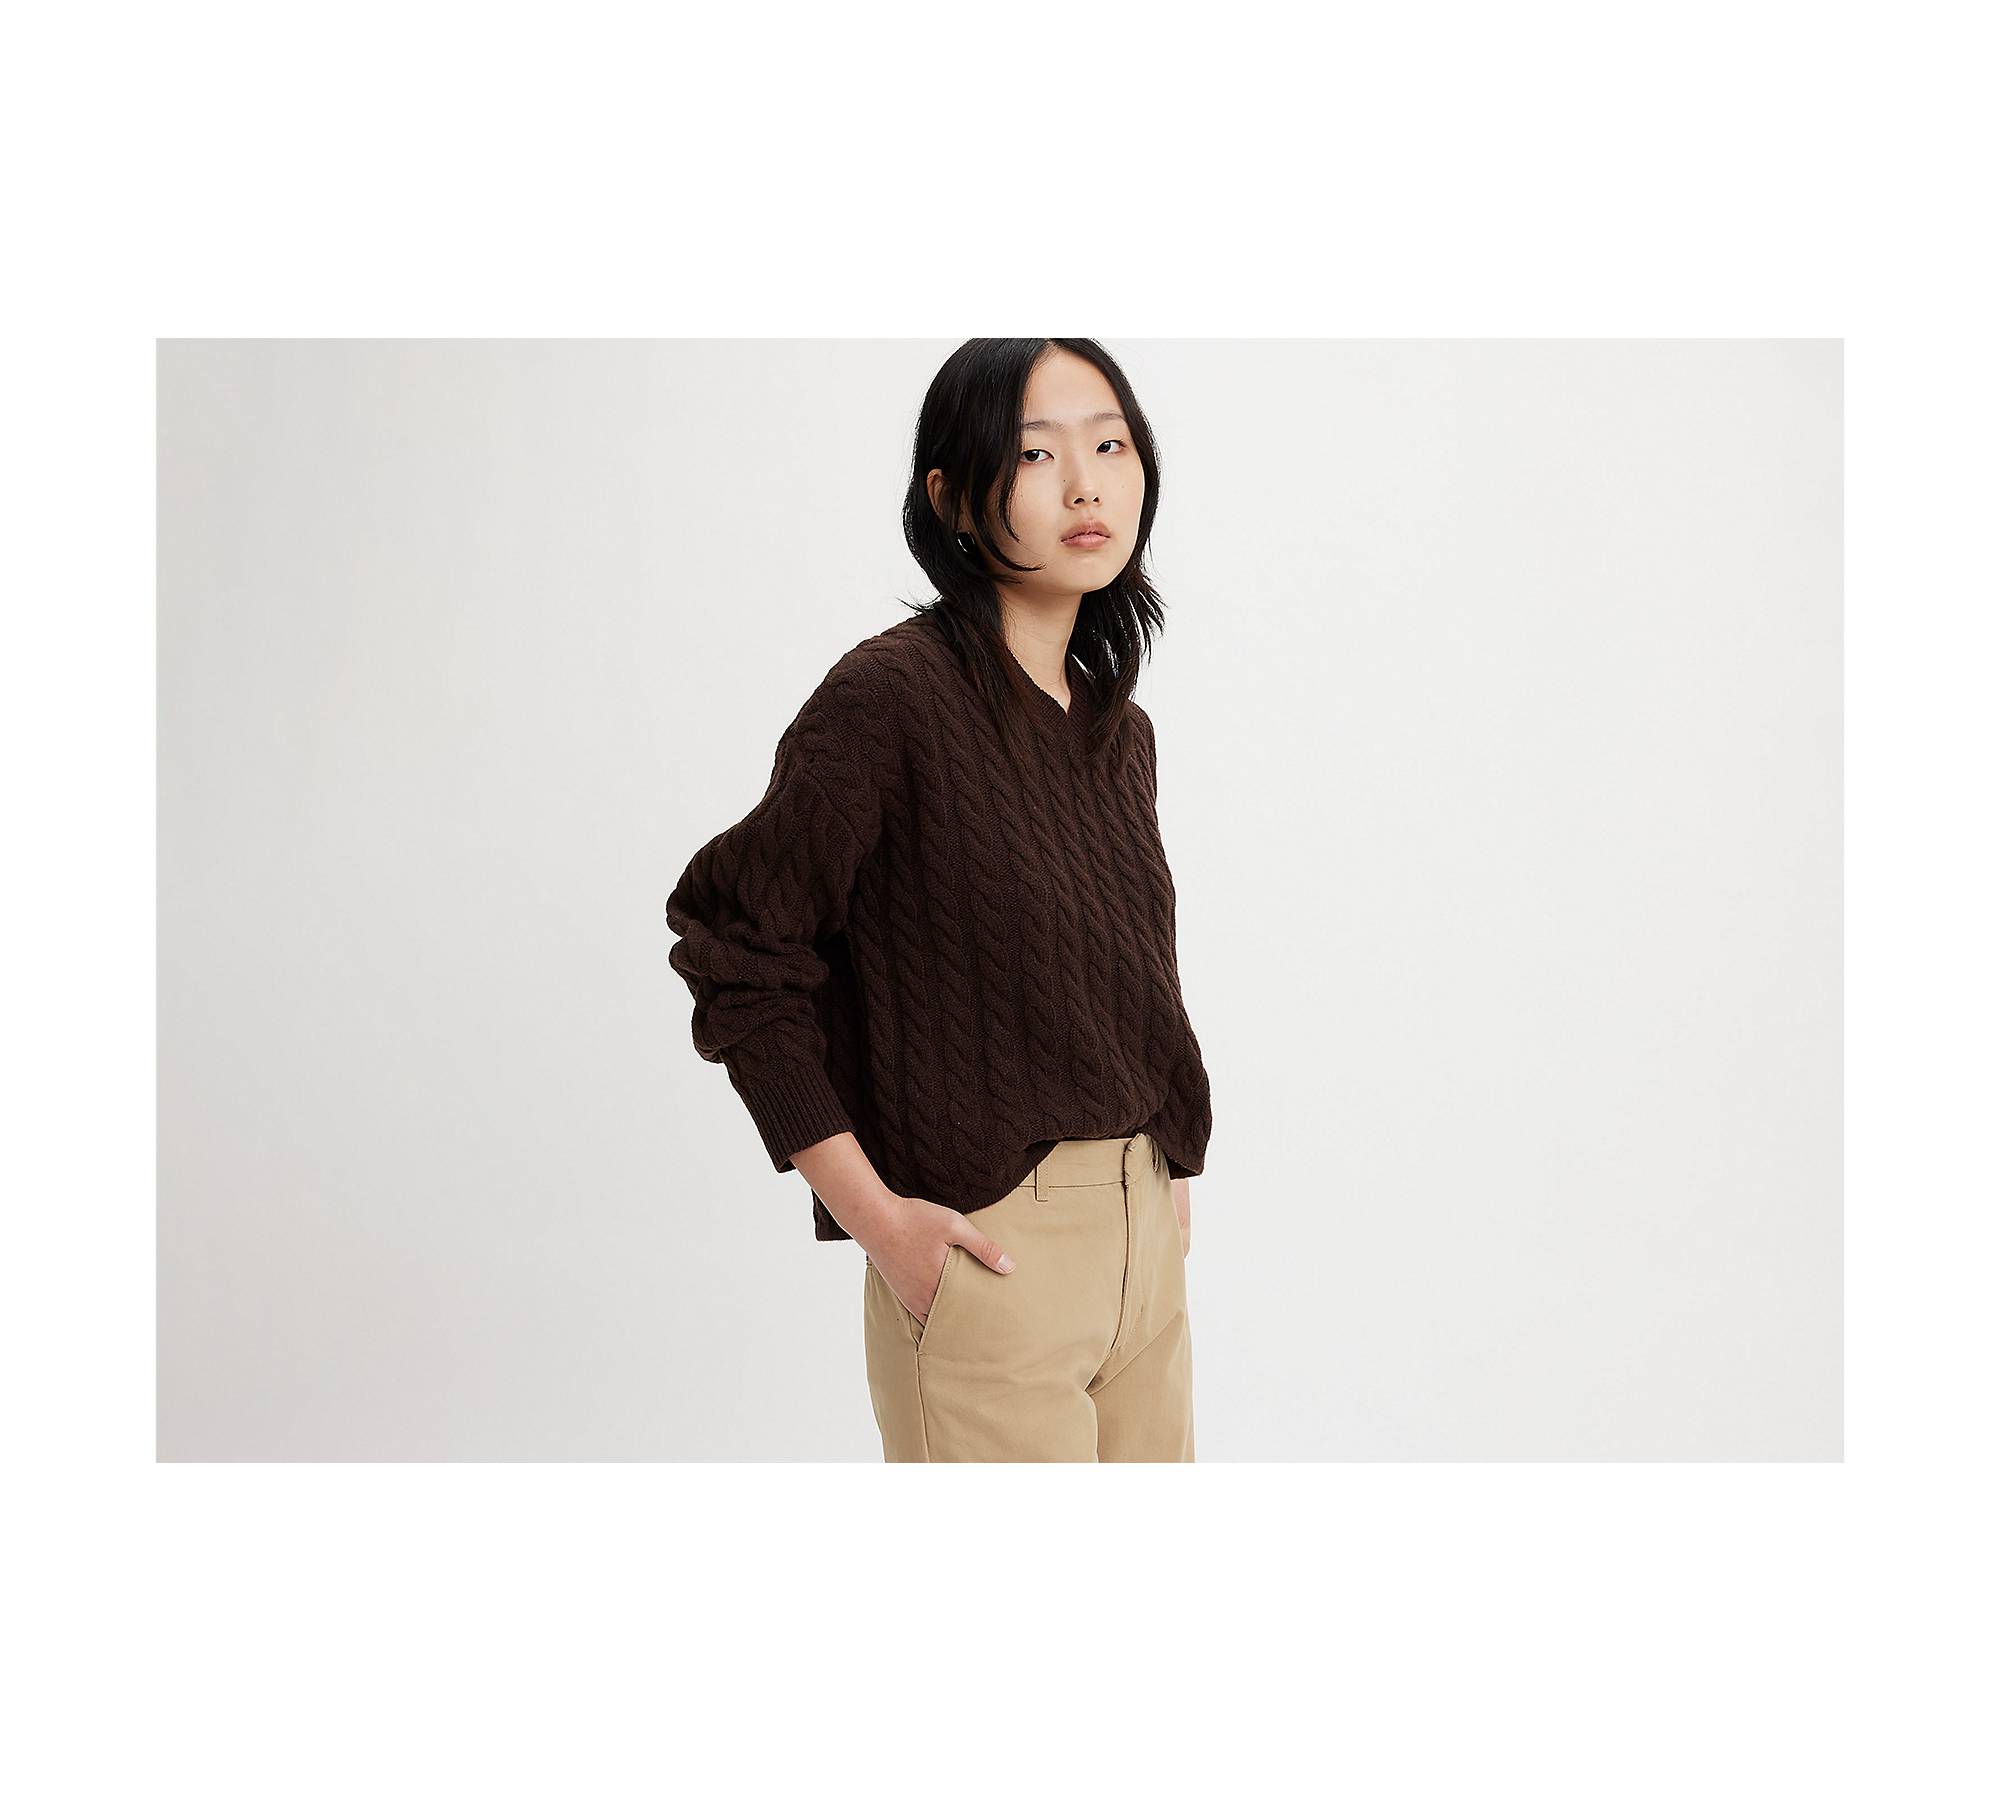 KNIT SWEATER | BROWN